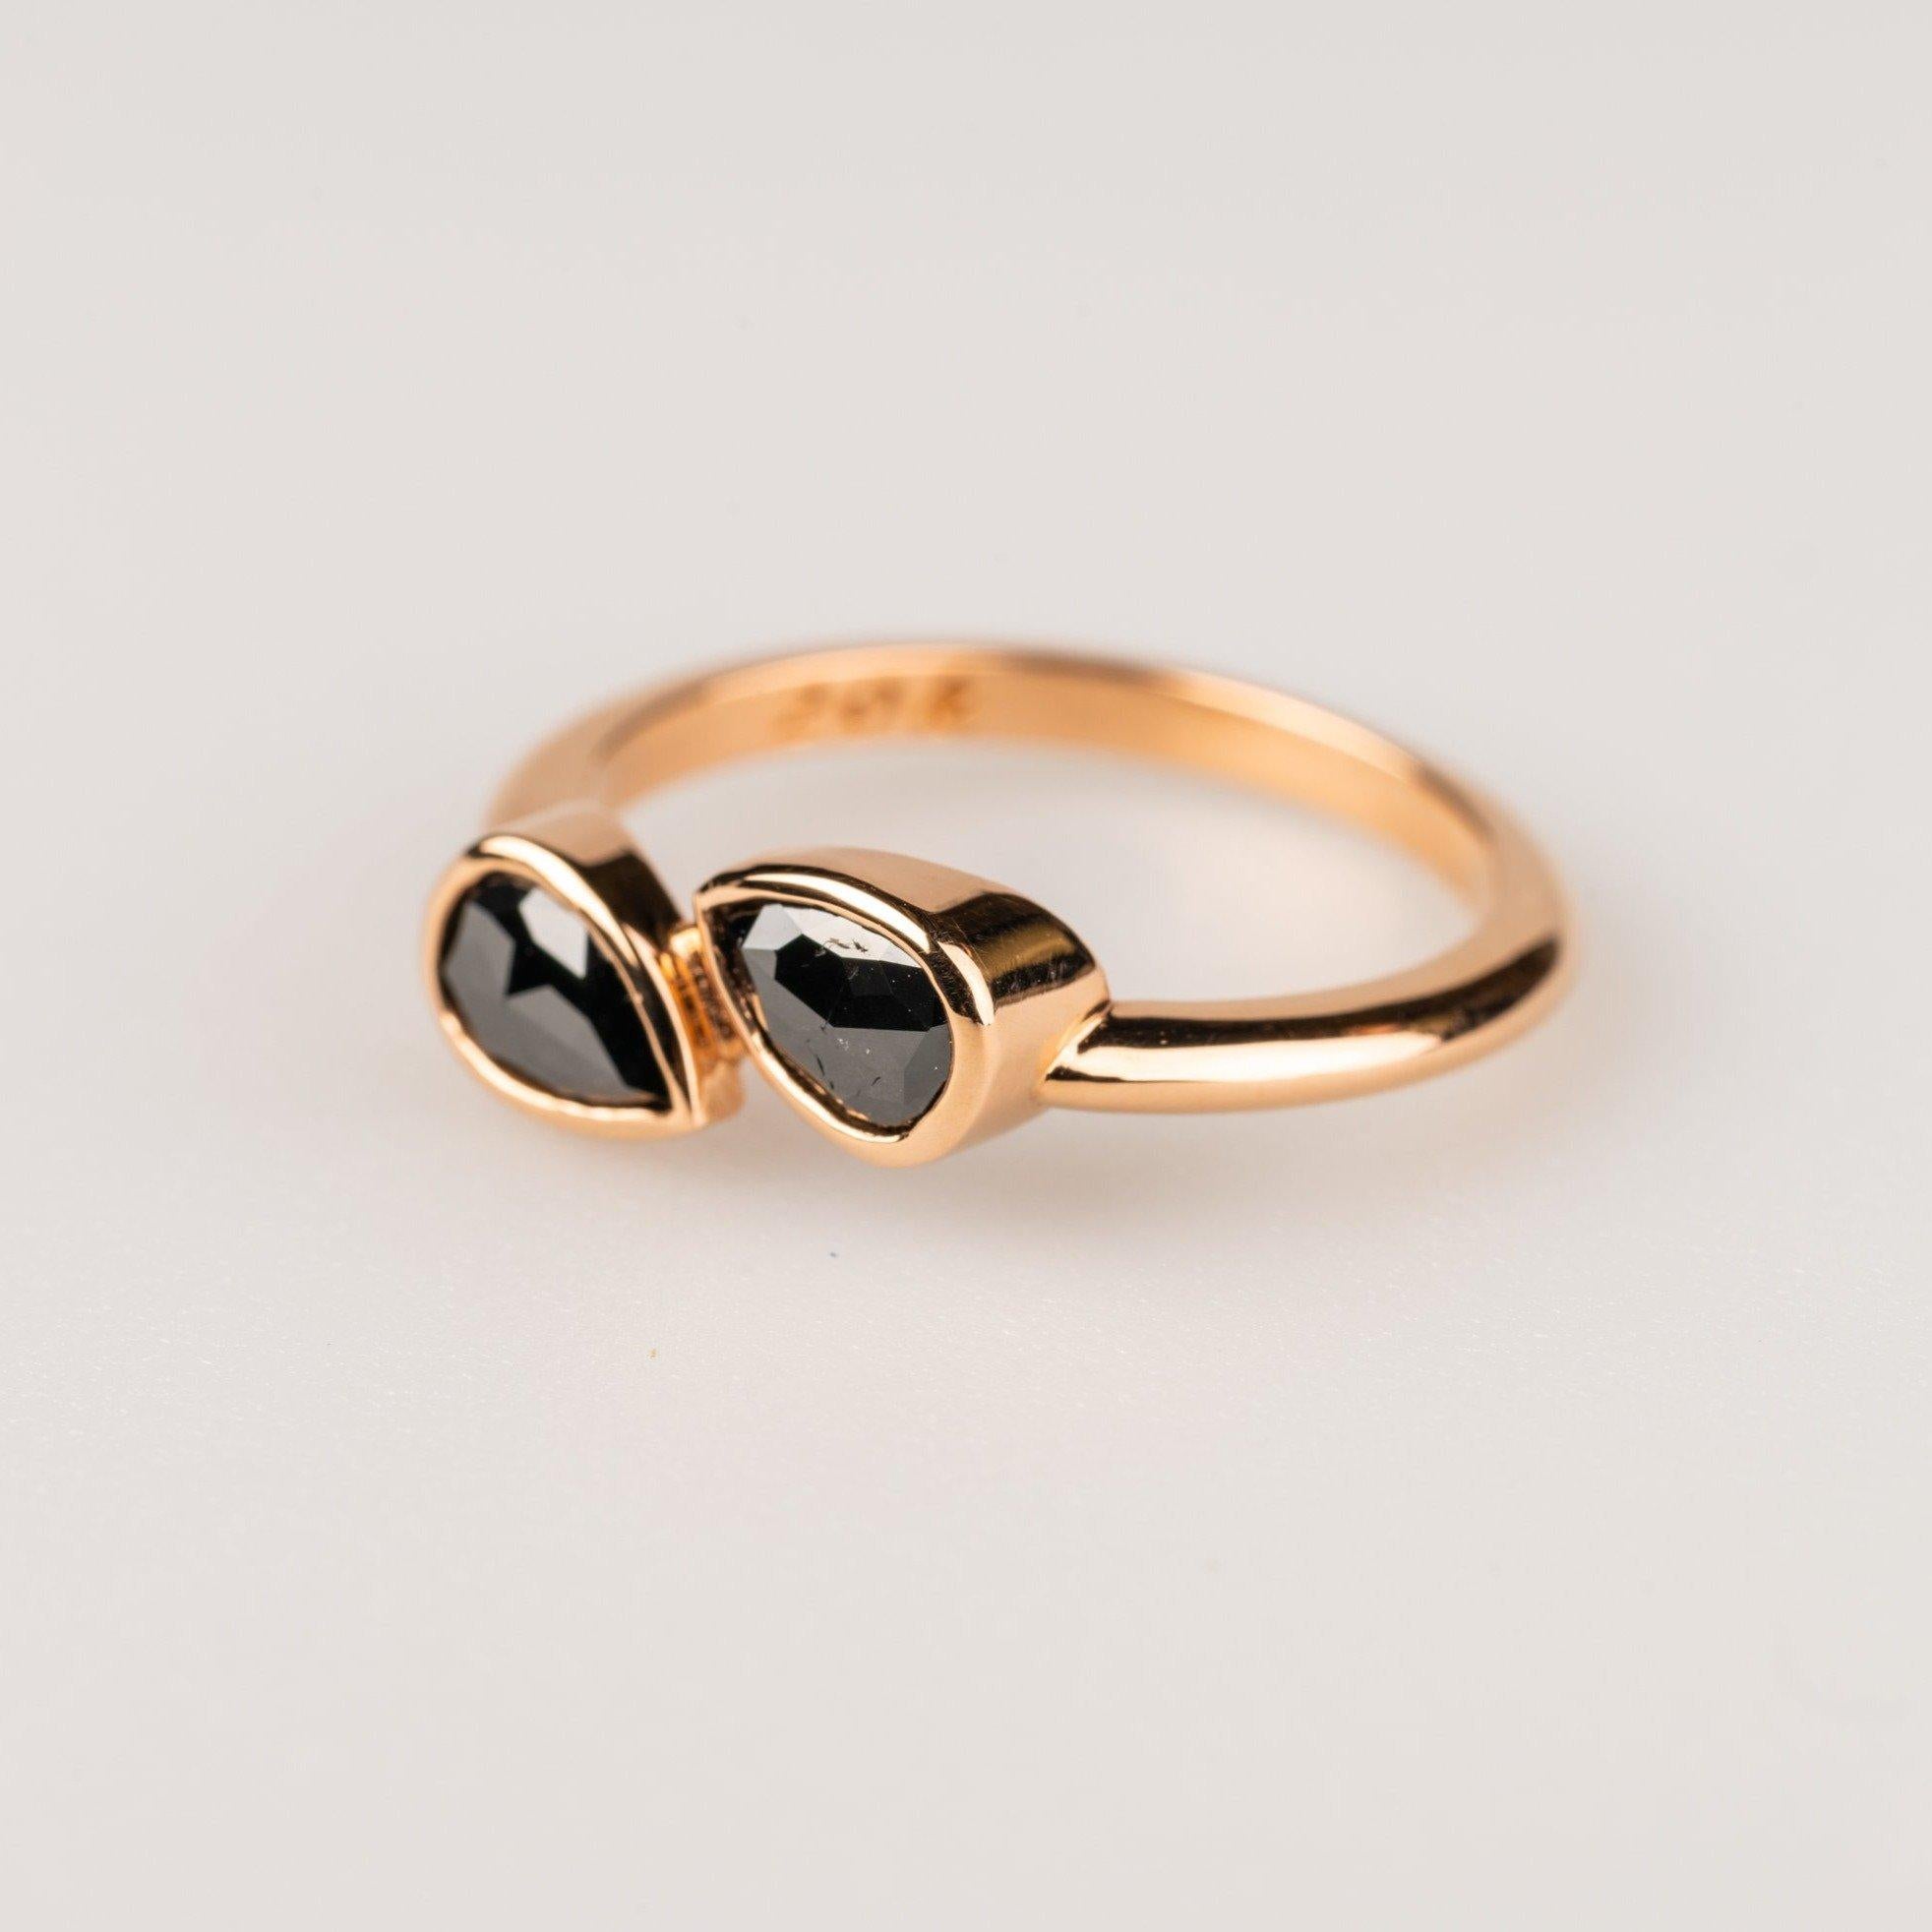 A 20k rose gold ring featuring two bezel set pear shaped rose cut black diamonds .6 total carats. Ring size 7. This ring was made and designed by Sydney Strong.